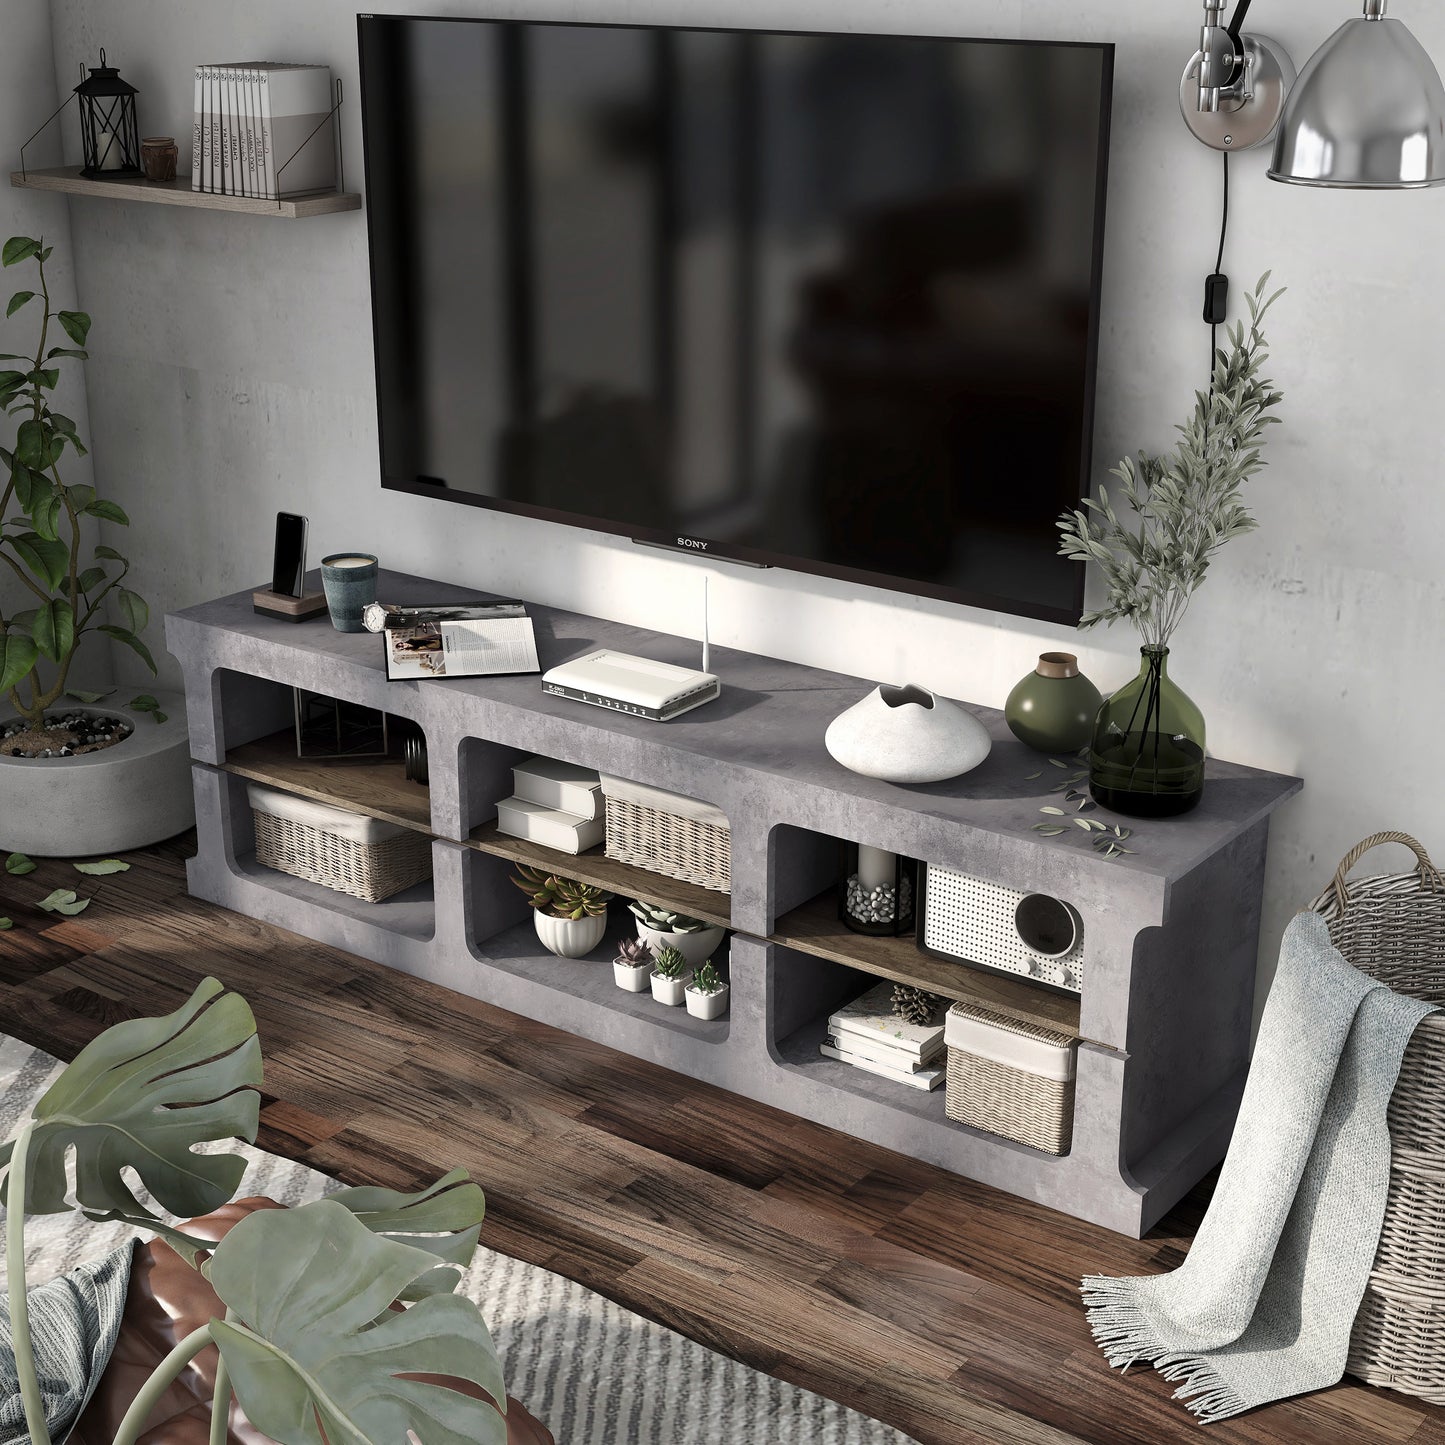 Left angled bird's view of an industrial cement and wood six-shelf TV stand in a living area with accessories